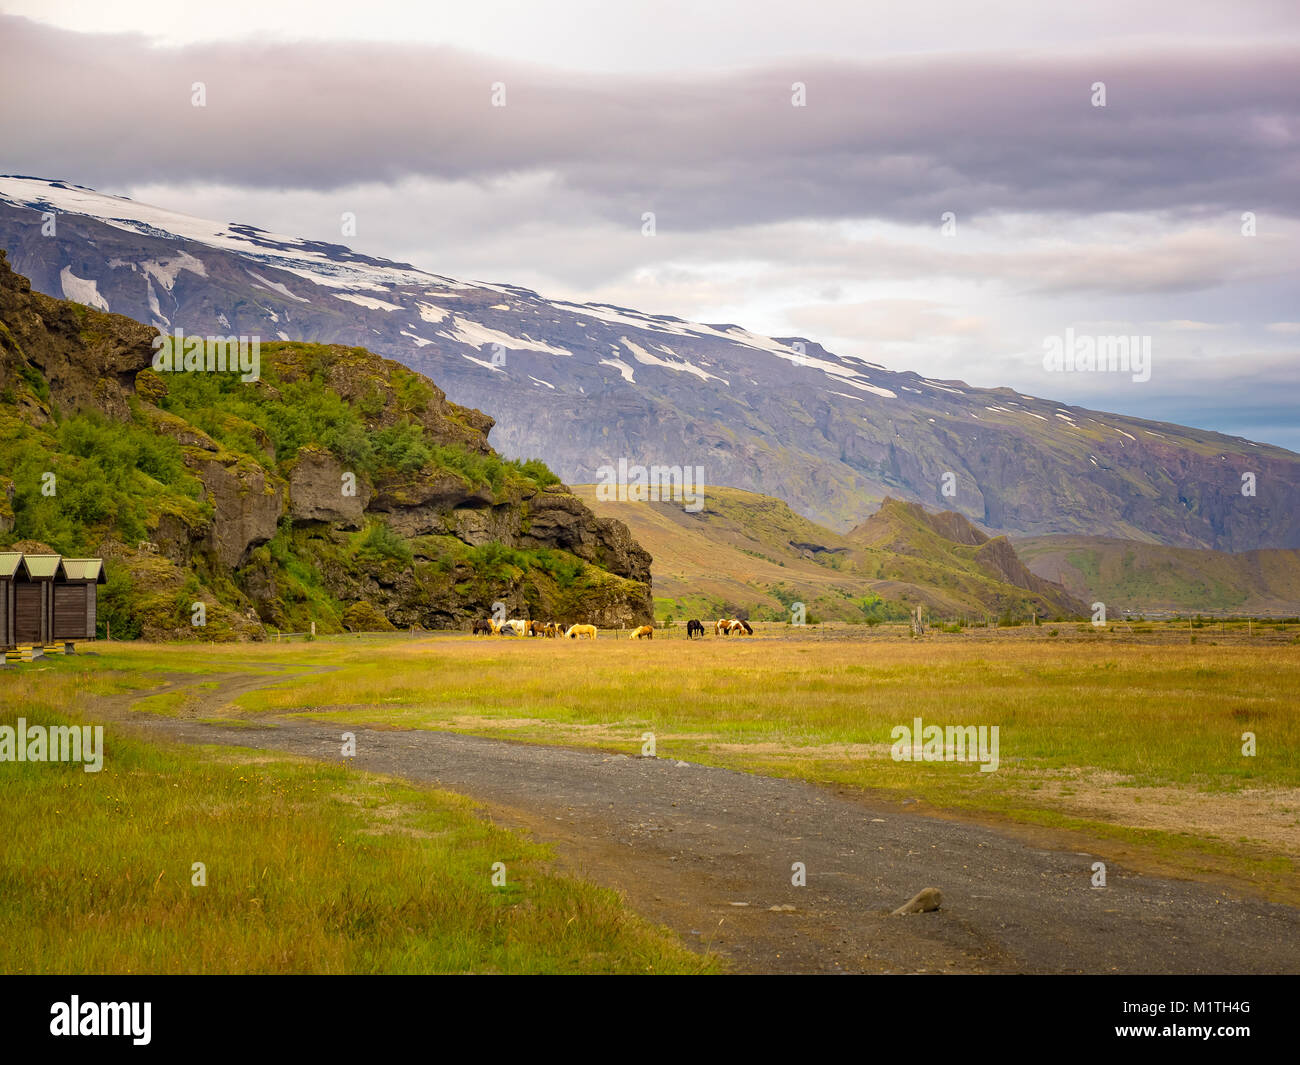 Flock of horses grazing in the grass field of rural Iceland Stock Photo